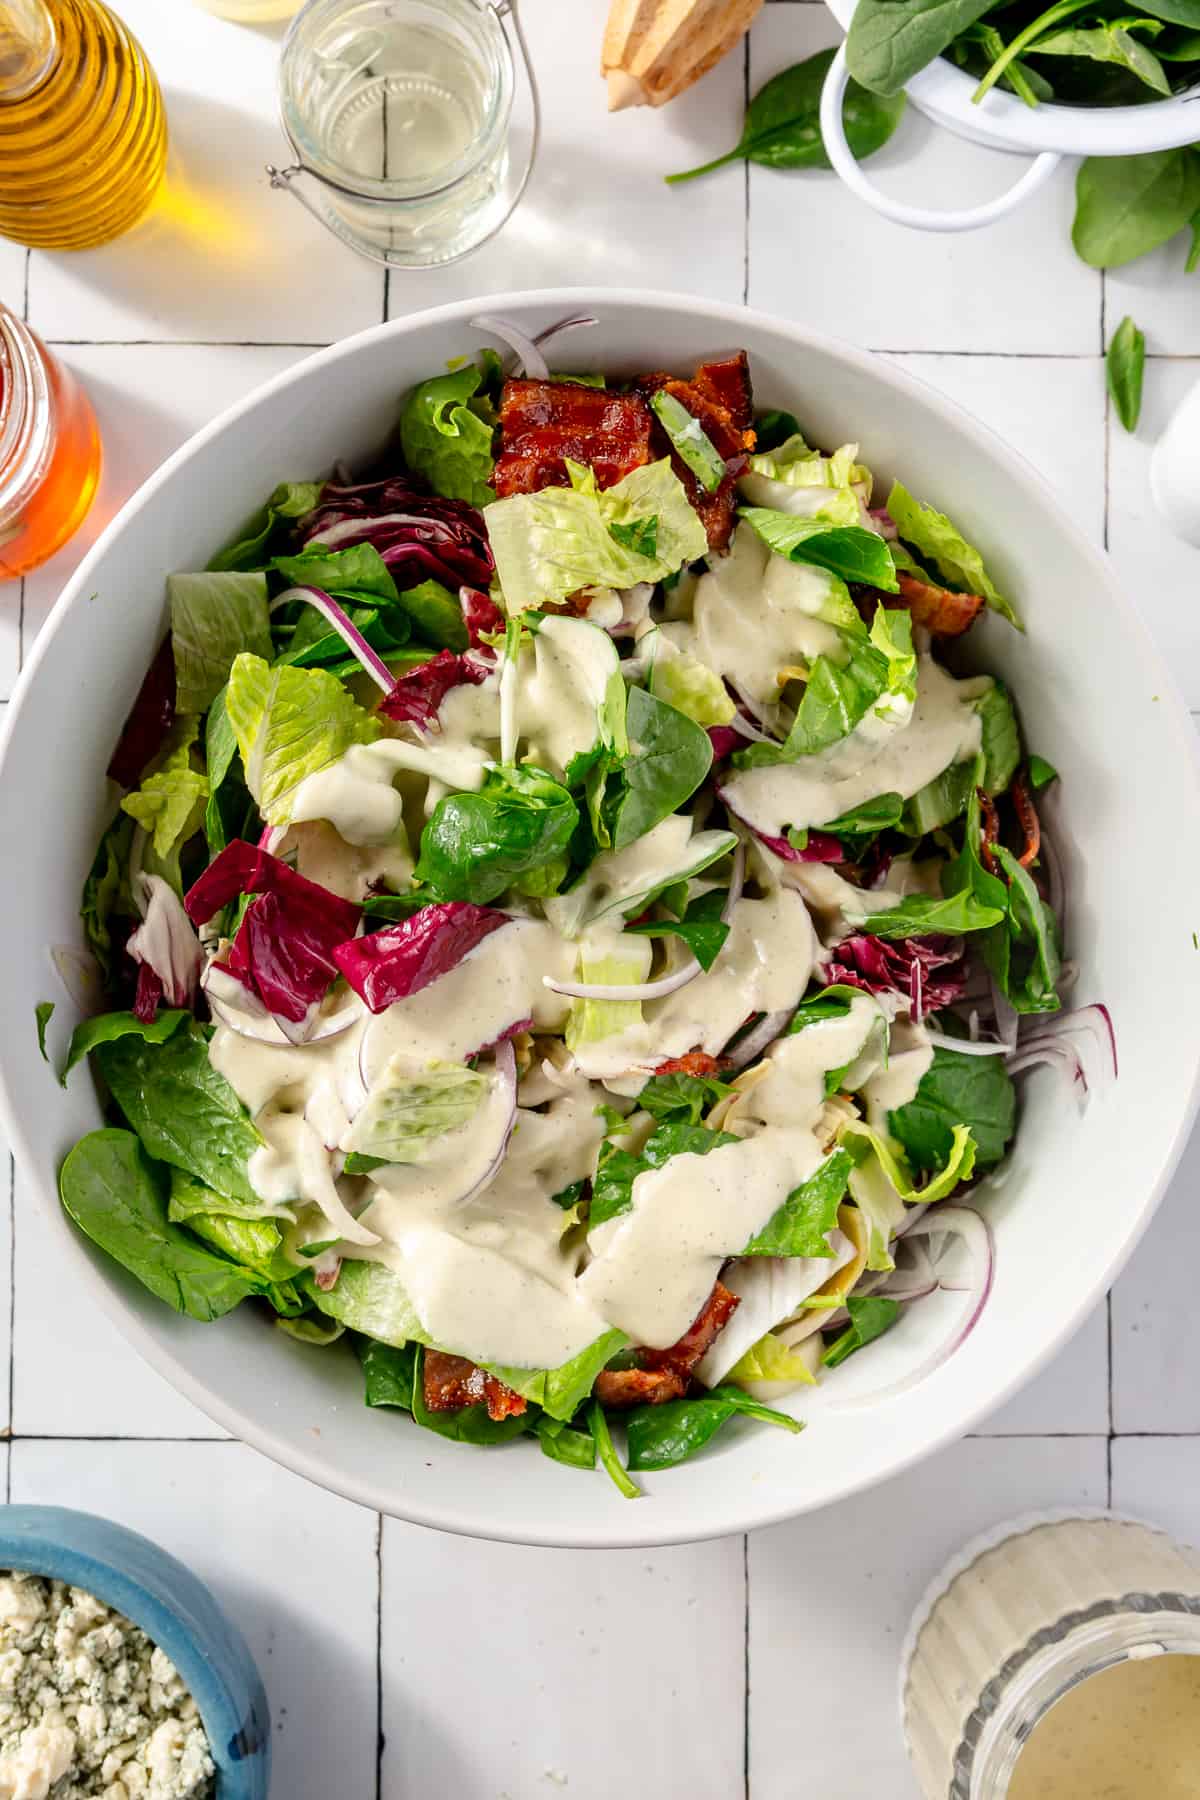 Tossed salad in large white bowl with dressing on top.